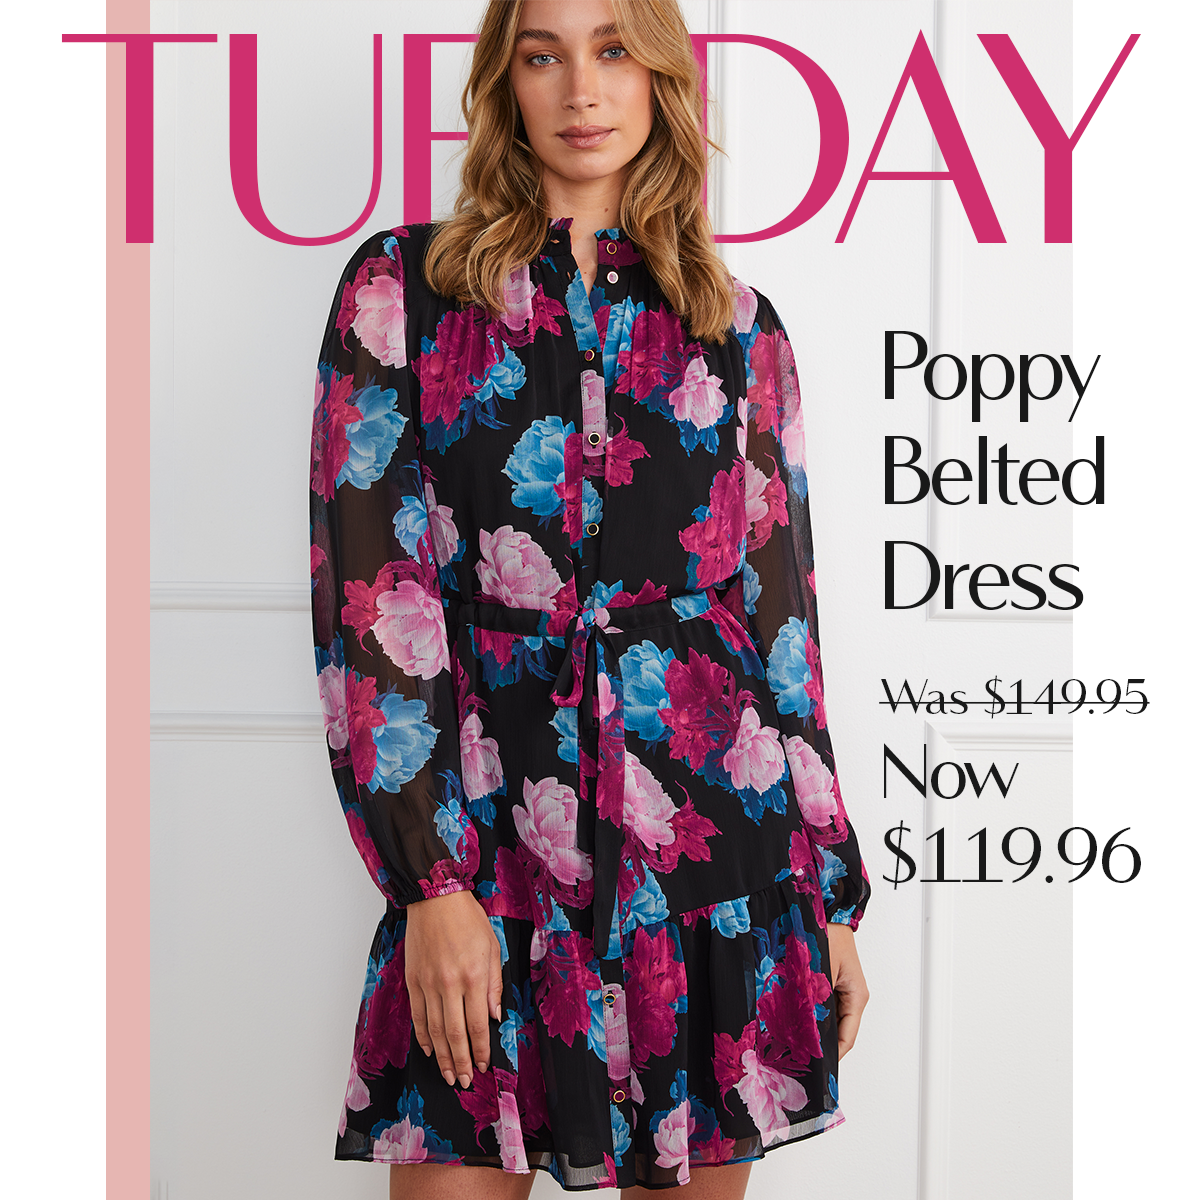 TUESDAY | Poppy Belted Dress Was $149.95 Now $119.96